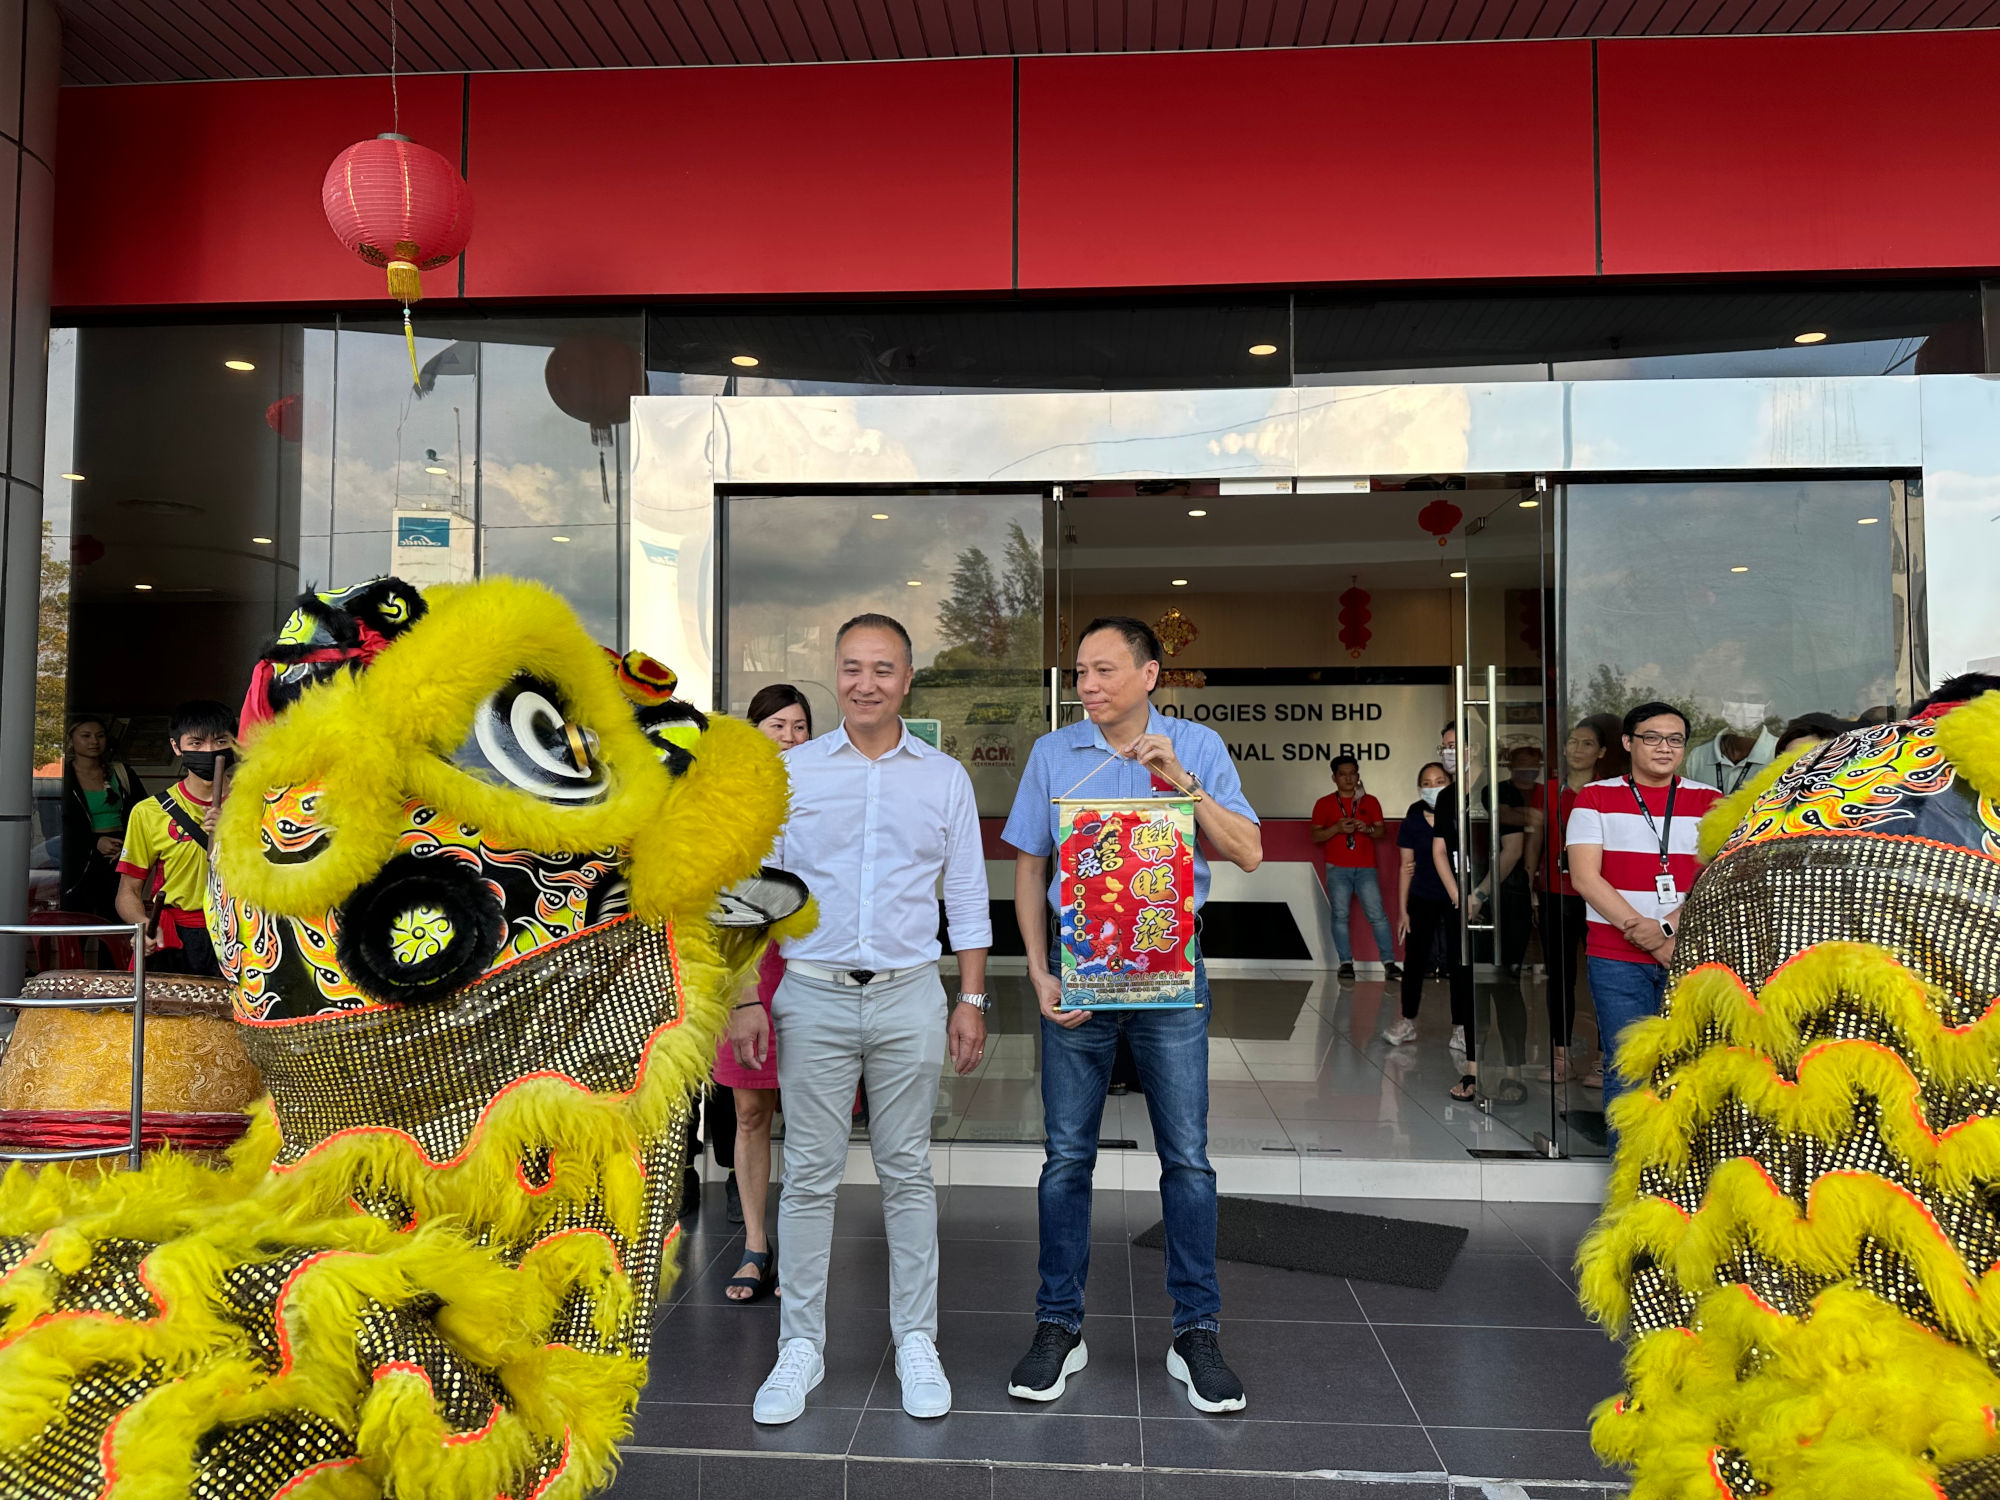 A colorful traditional lion dance performance outside a building with a red overhang and a lantern hanging above. Two people in lion dance costumes with yellow and black fur are visible. GETS CEO Dan Tang and another employee standing next to the entrance holding a red decorative item with Chinese patterns. Onlookers gather at the entrance of the building.